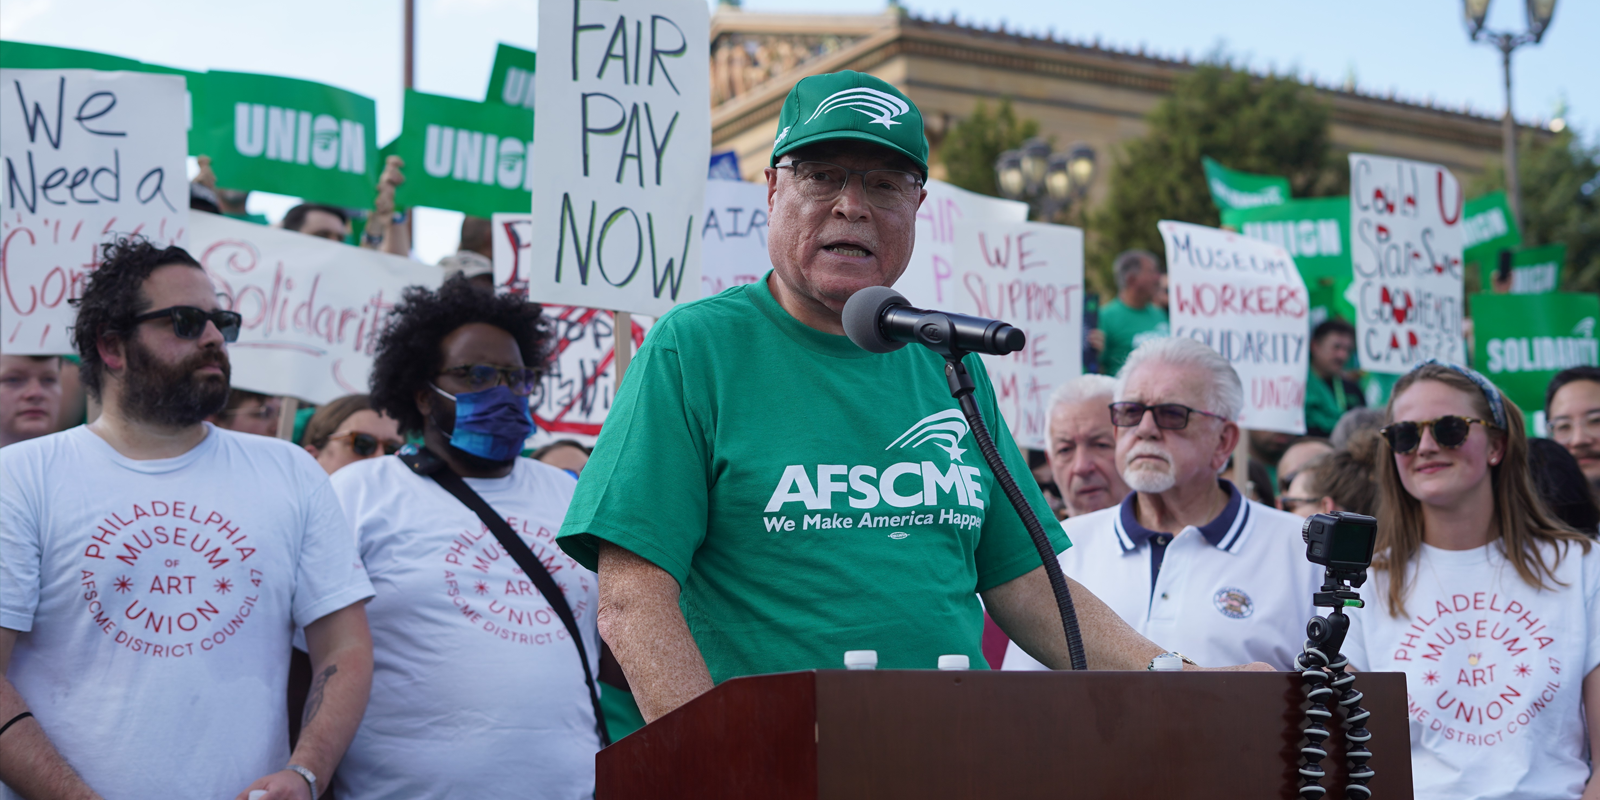 Gallup poll: More Americans believe in unions and want them to become stronger 